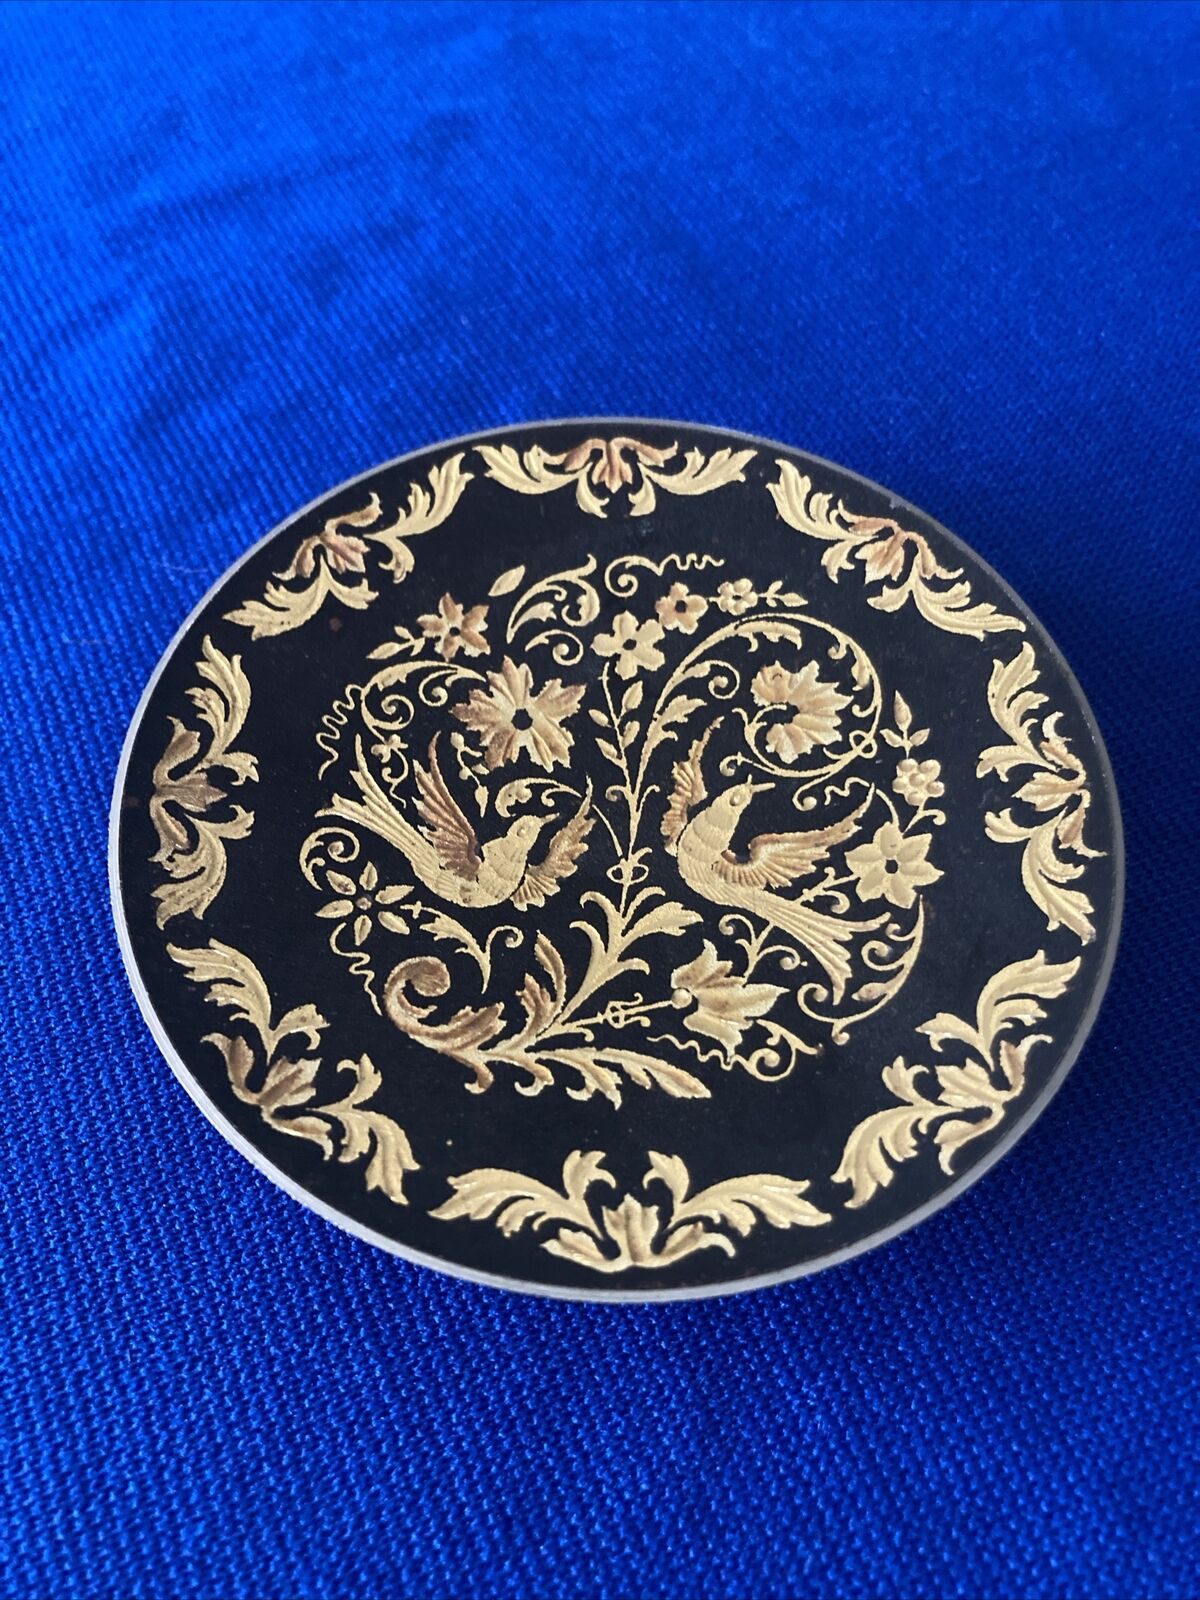 Vintage Damascene Toledo Spain Miniature Plate Inlaid Gold and Black - Footed 3”